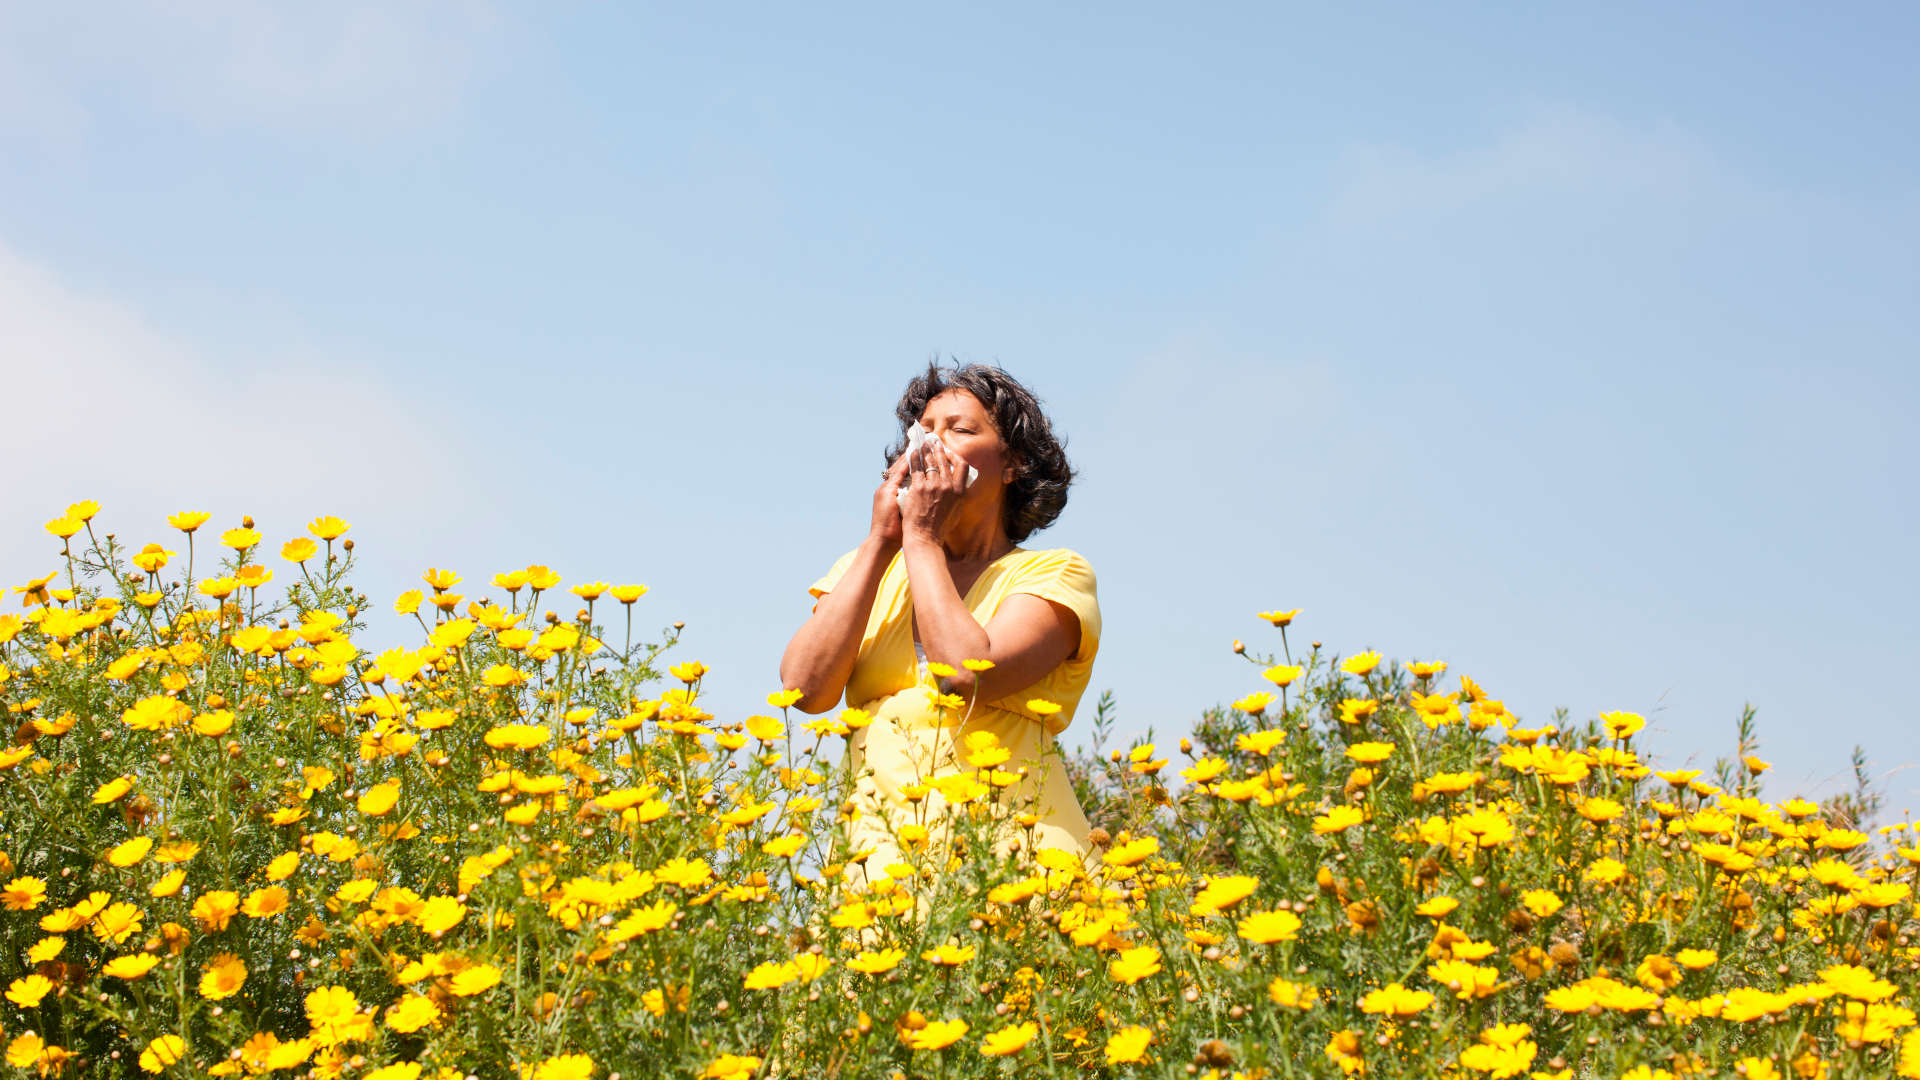 A woman with seasonal allergies blows her nose while standing in field of yellow flowers.